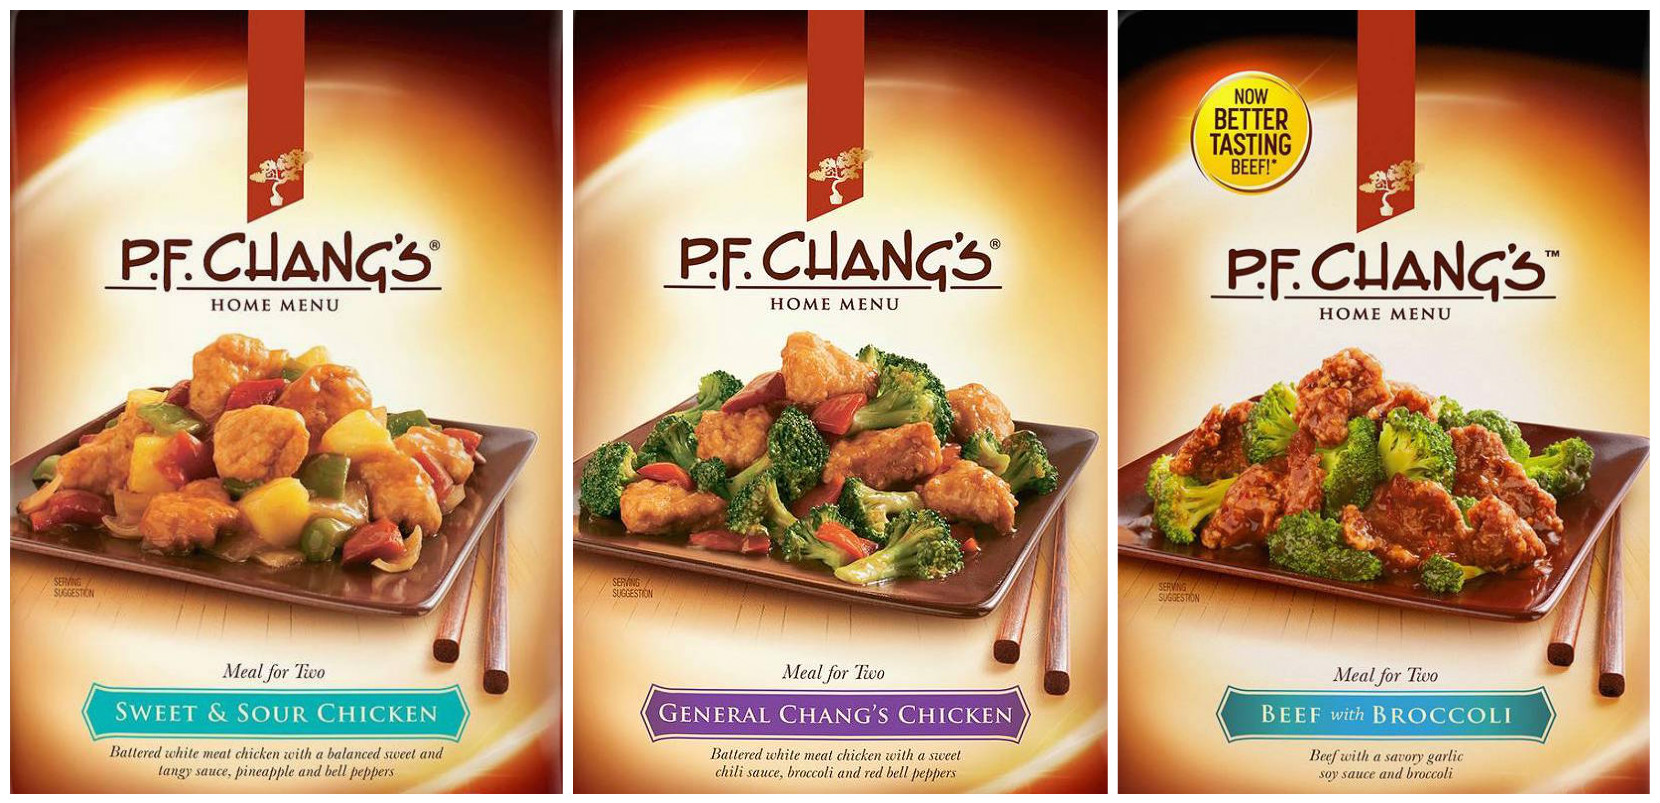 ConAgra Expands P.F. Chang’s Recall To Include 6 Additional Frozen Meals